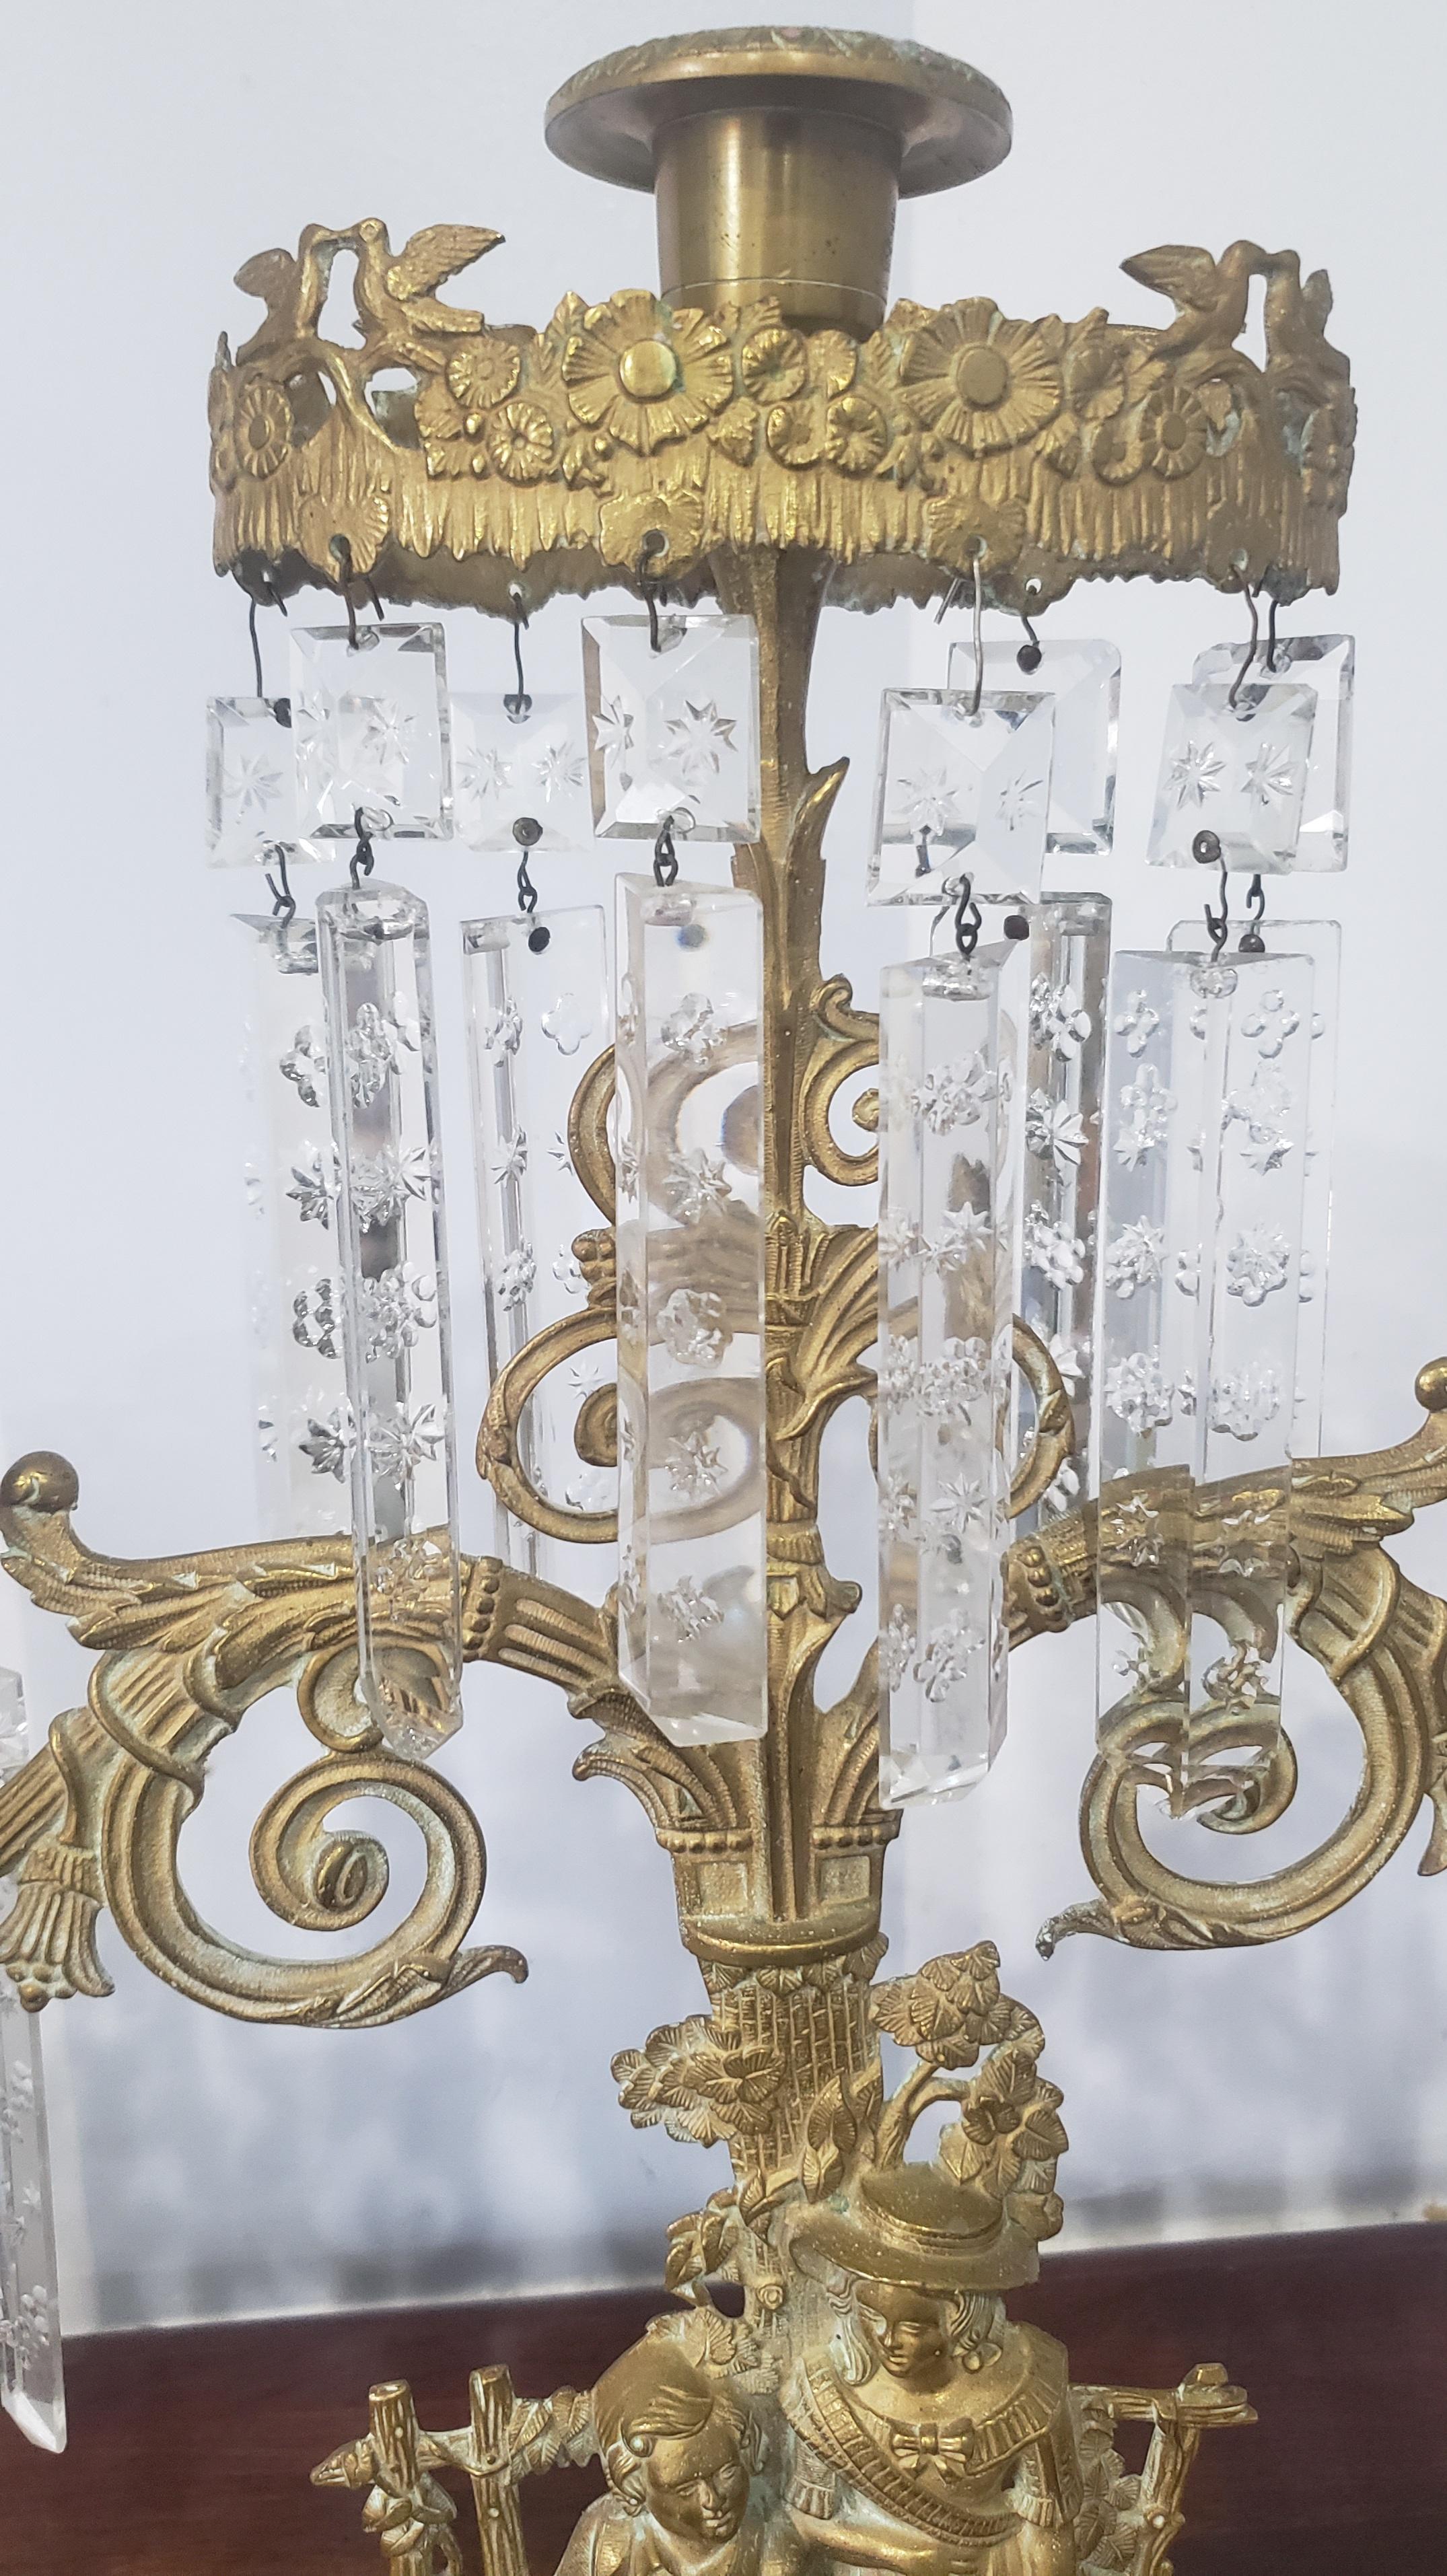 circa 1840s Cornelius and Co. Cast Brass & Marble 3-Arm Girandole Candelabra In Good Condition For Sale In Germantown, MD